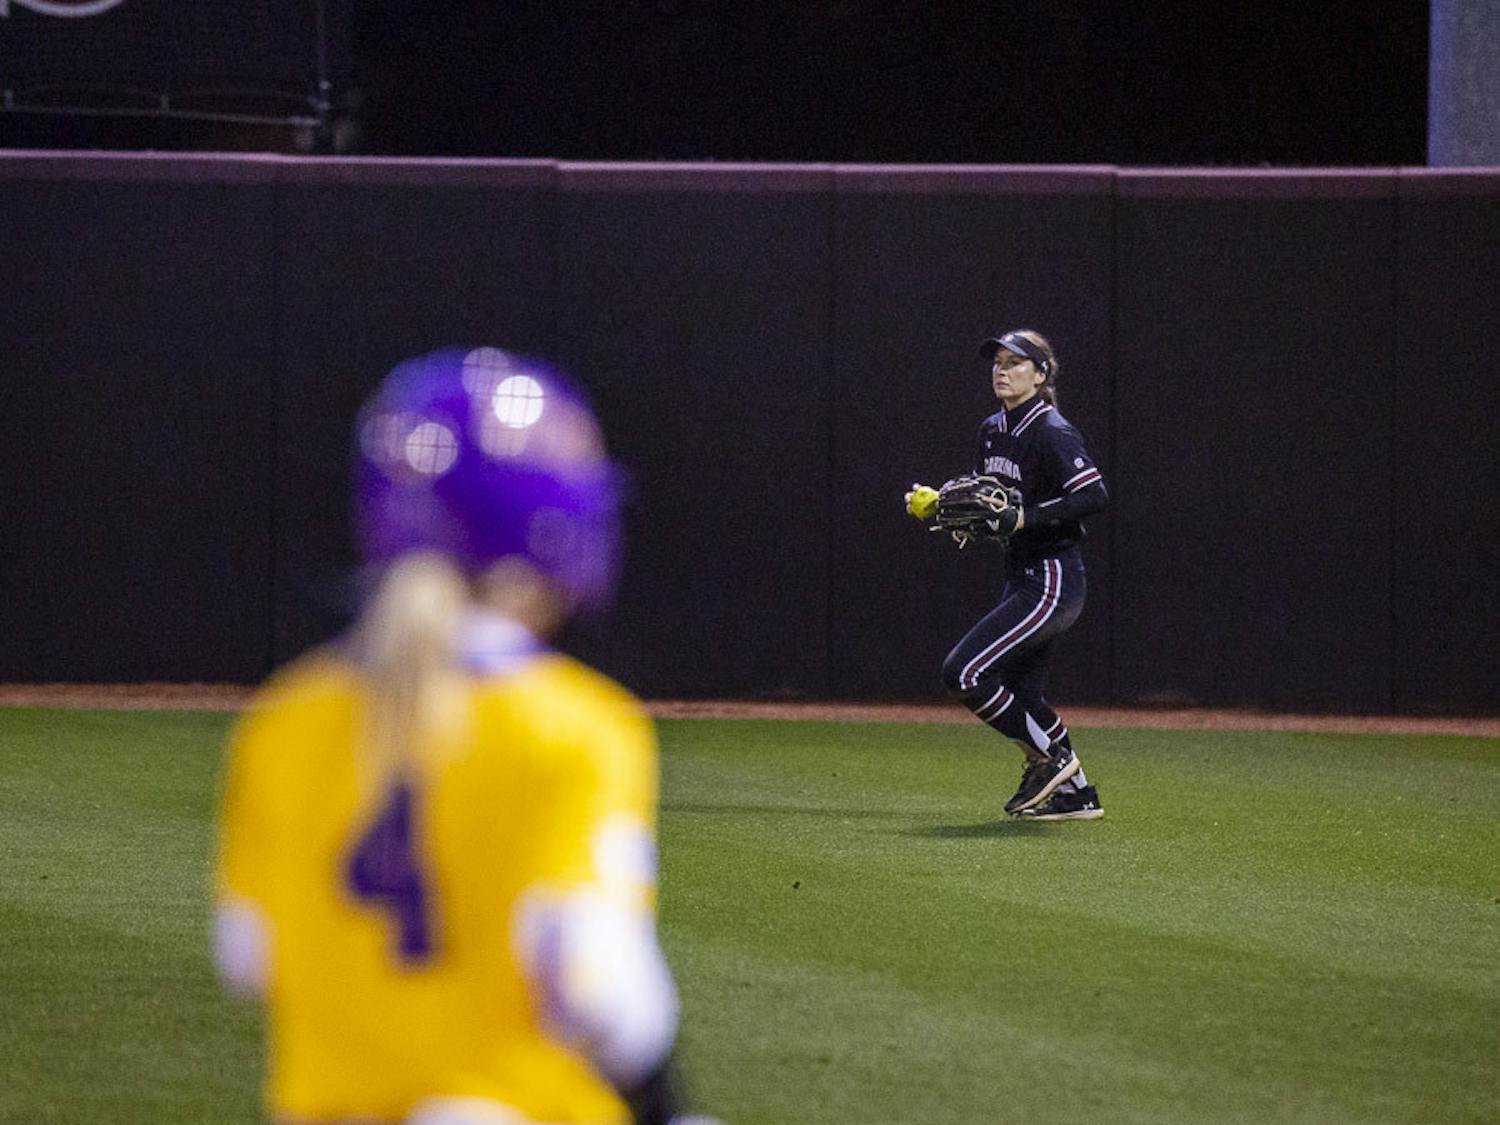 Sophomore outfielder Marissa Gonzales gets ready to throw the ball into the infield after catching a fly ball during the second game of the doubleheader against LSU on March 13, 2023. The Tigers beat the Gamecocks 5-1.